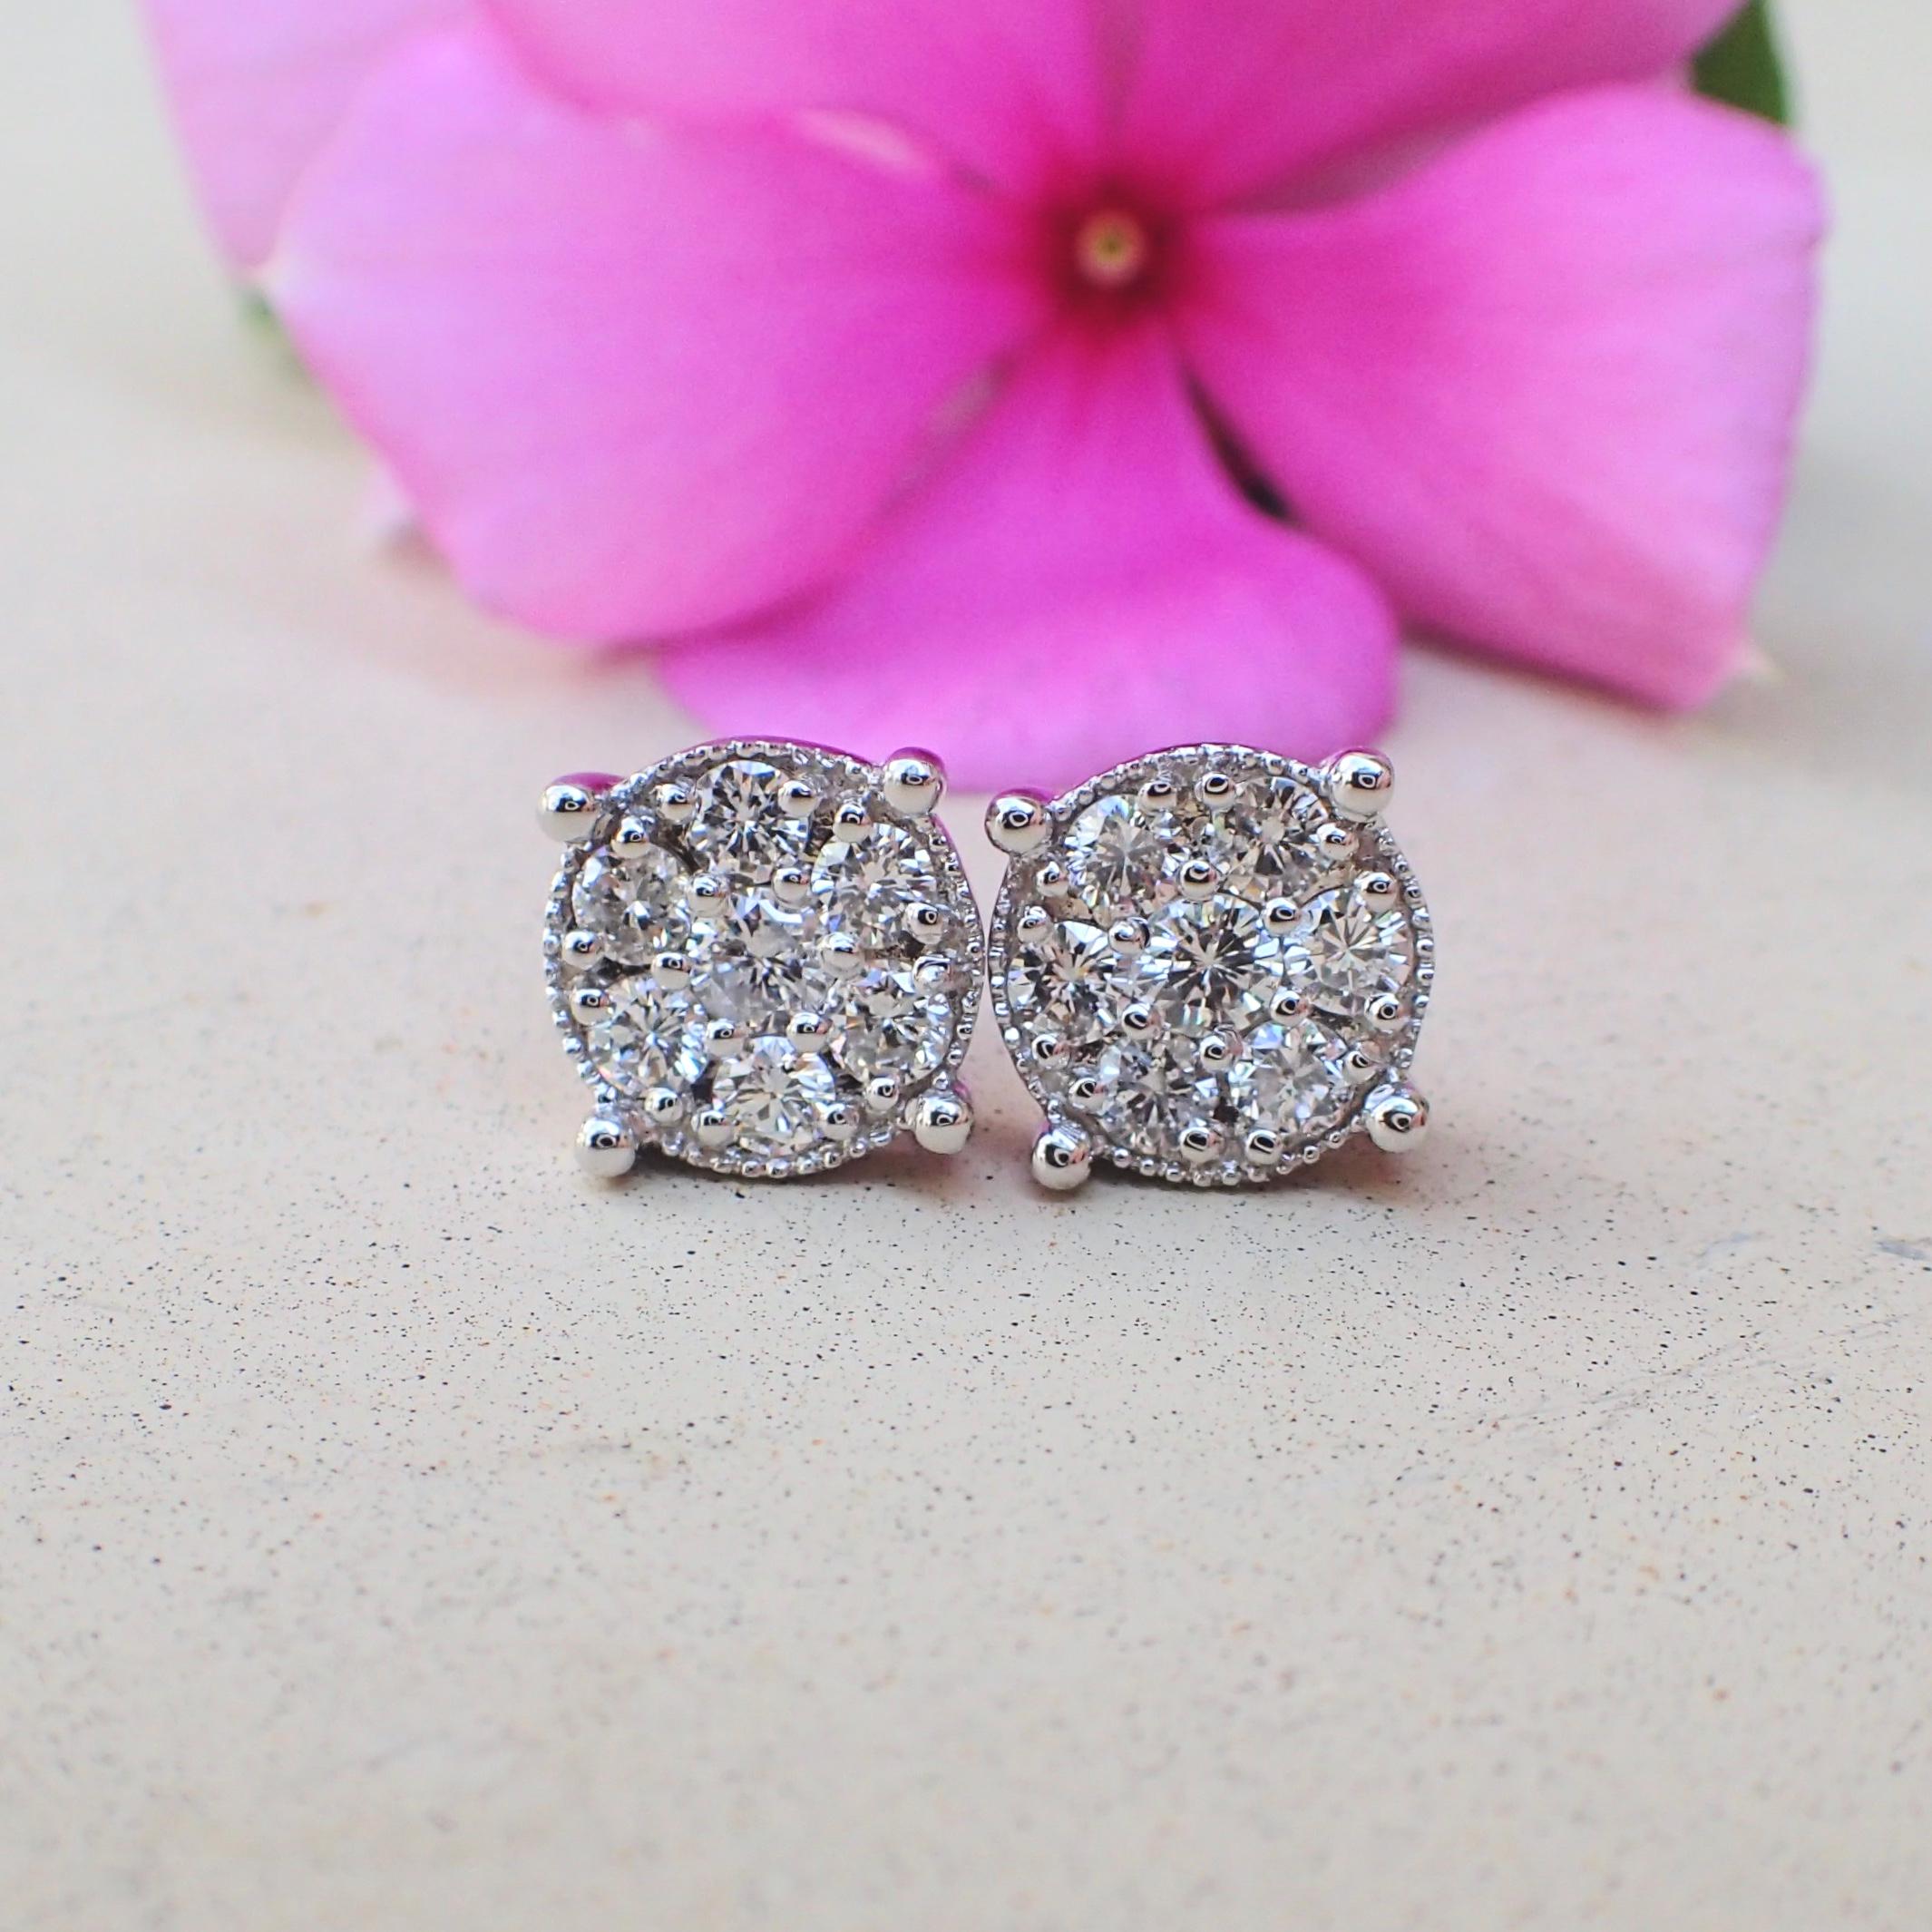 A pair of 18k white gold earrings are prong set with two (2) Round Brilliant Cut diamonds measuring 2.6mm x 2.6mm that weigh a total of 0.16 carats with Cold Grade G and Clarity Grade VS and surrounding the center stones are twelve (12) prong set